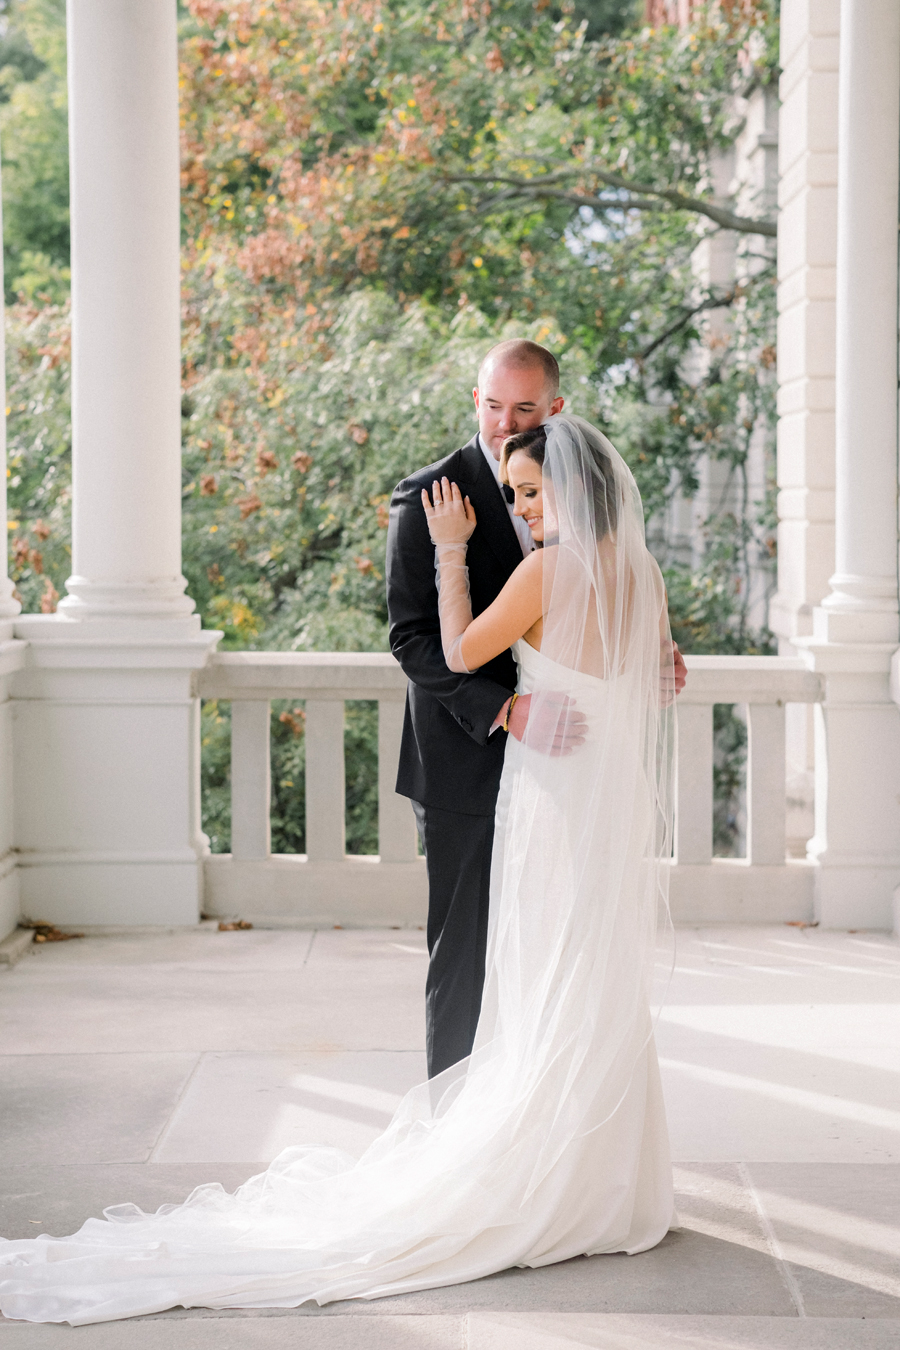 A bride and groom take portraits on the University of Missouri's campus for their Stephens College wedding photographed by Columbia, Missouri wedding photographer Love Tree Studios.